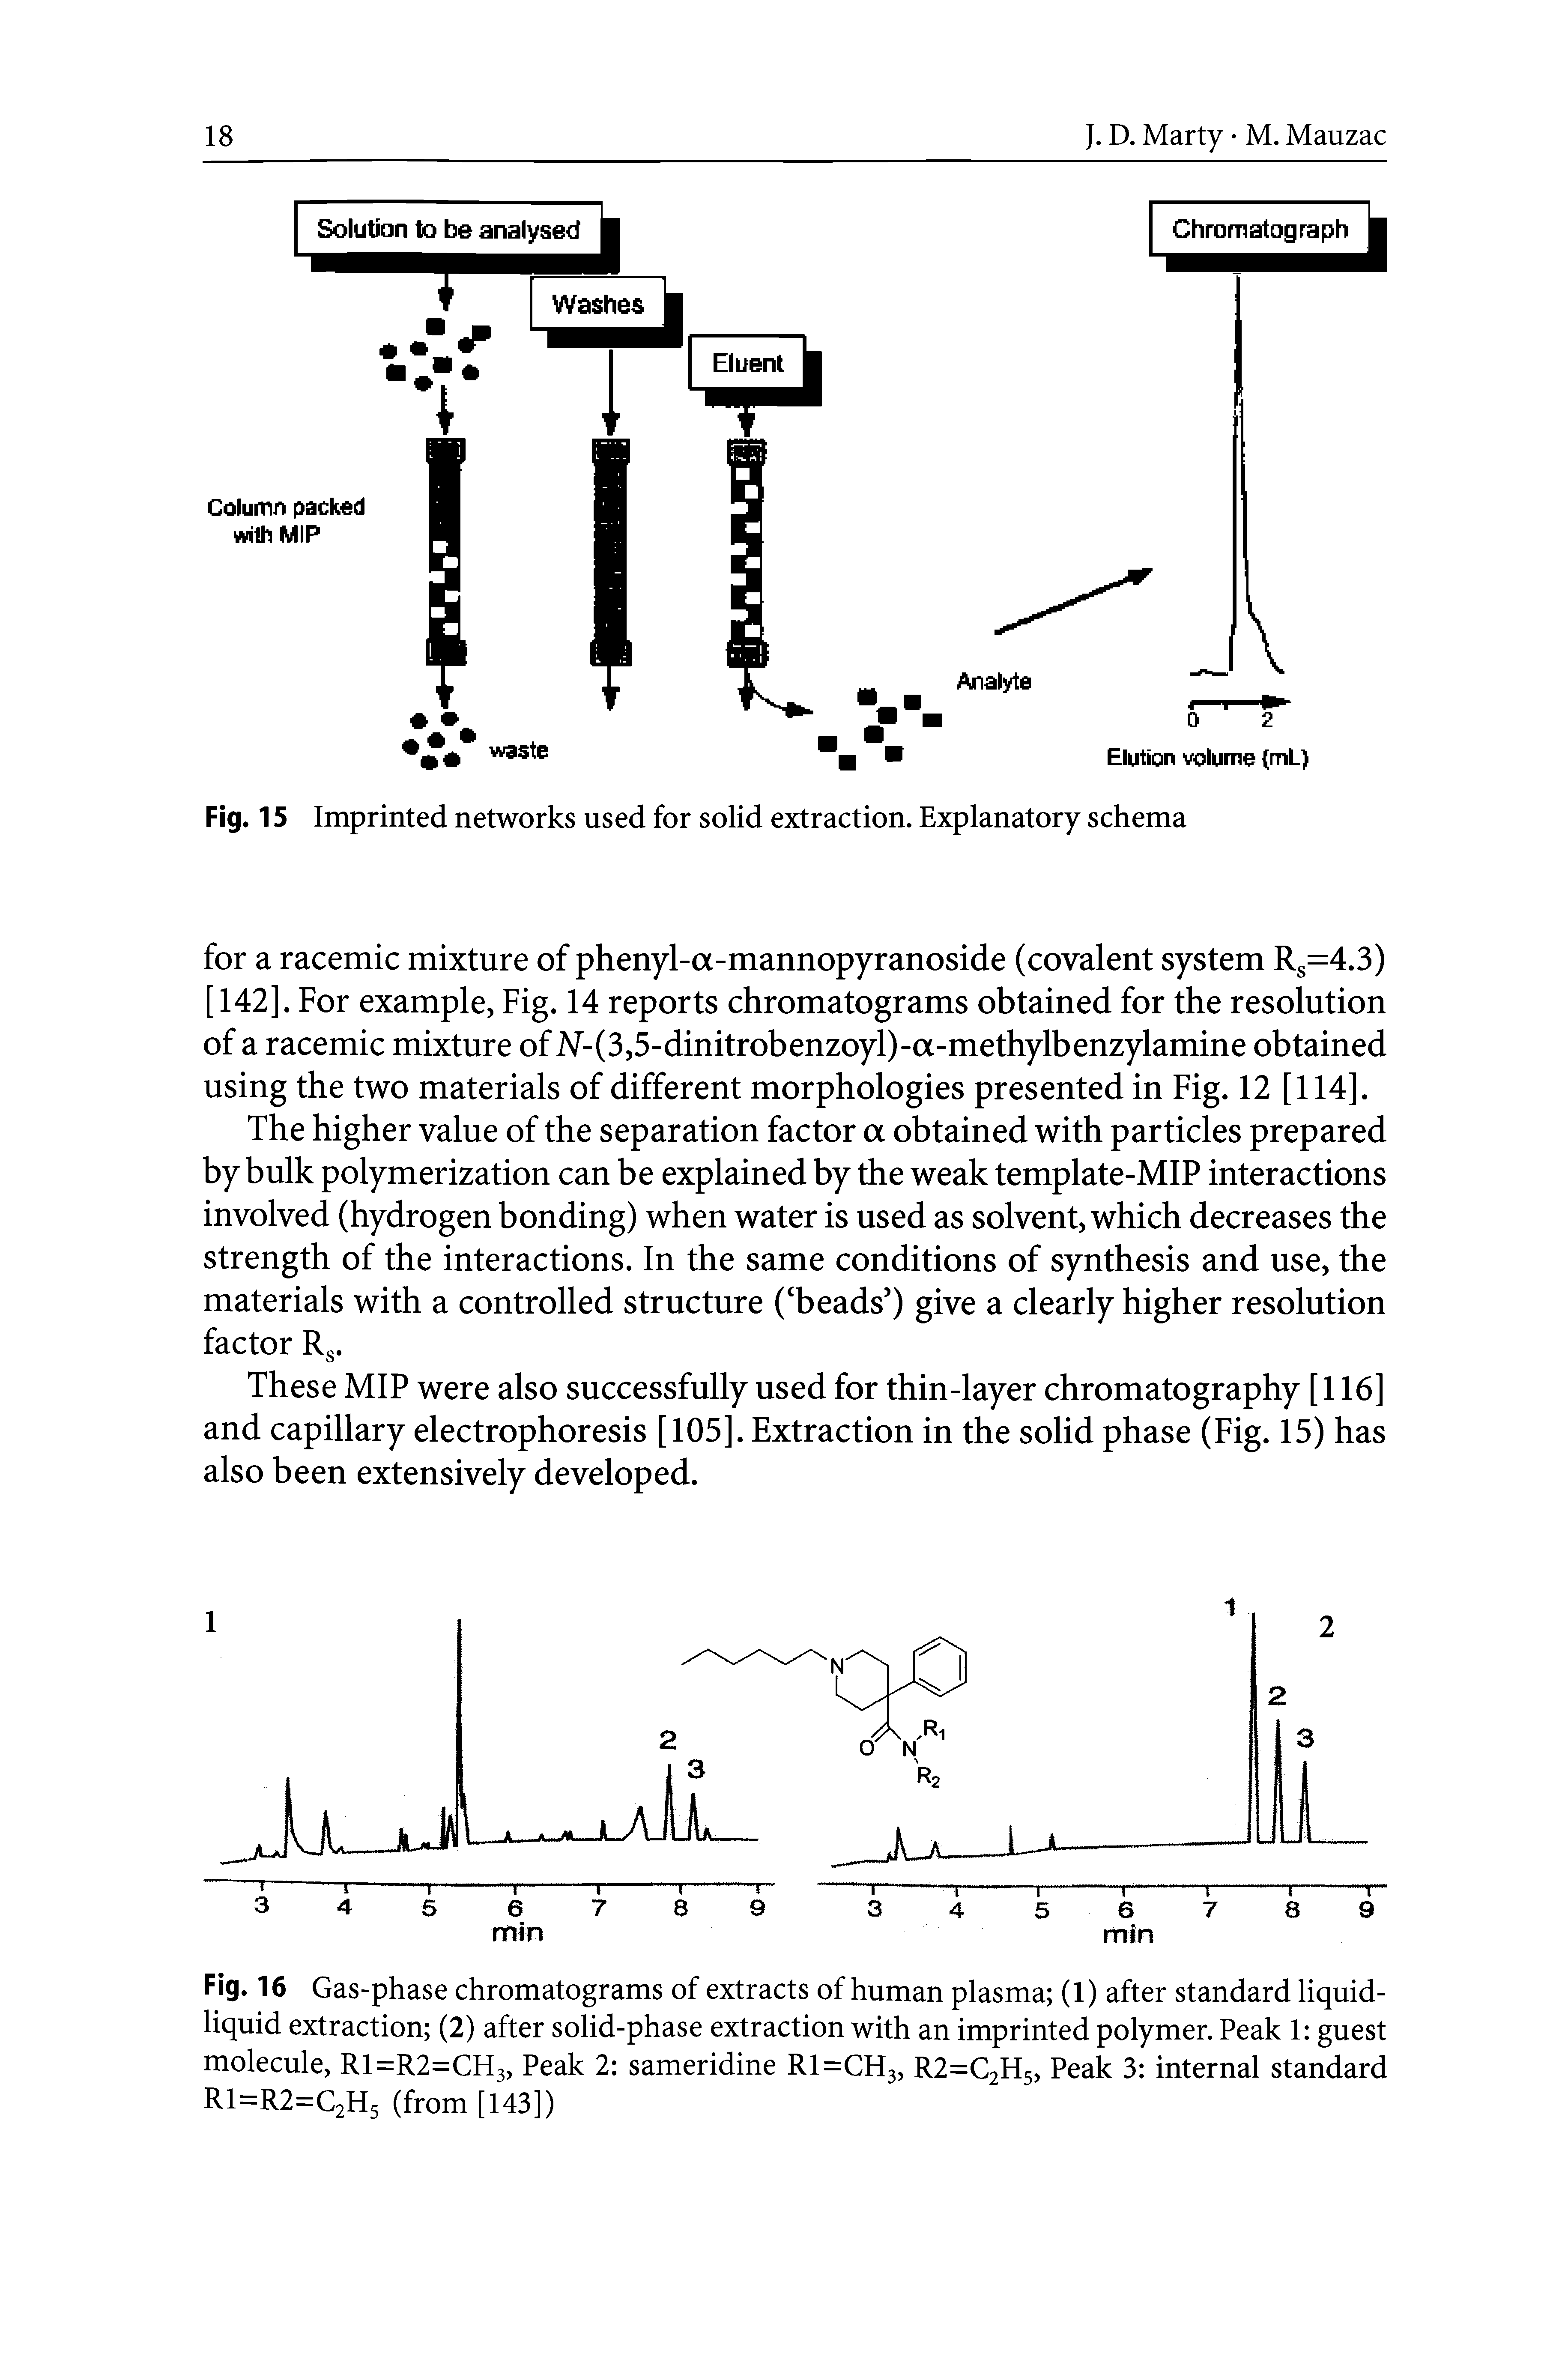 Fig. 16 Gas-phase chromatograms of extracts of human plasma (1) after standard liquid-liquid extraction (2) after solid-phase extraction with an imprinted polymer. Peak 1 guest molecule, R1=R2=CH3, Peak 2 sameridine R1=CH3, R2=C2H5, Peak 3 internal standard R1=R2=C2H5 (from [143])...